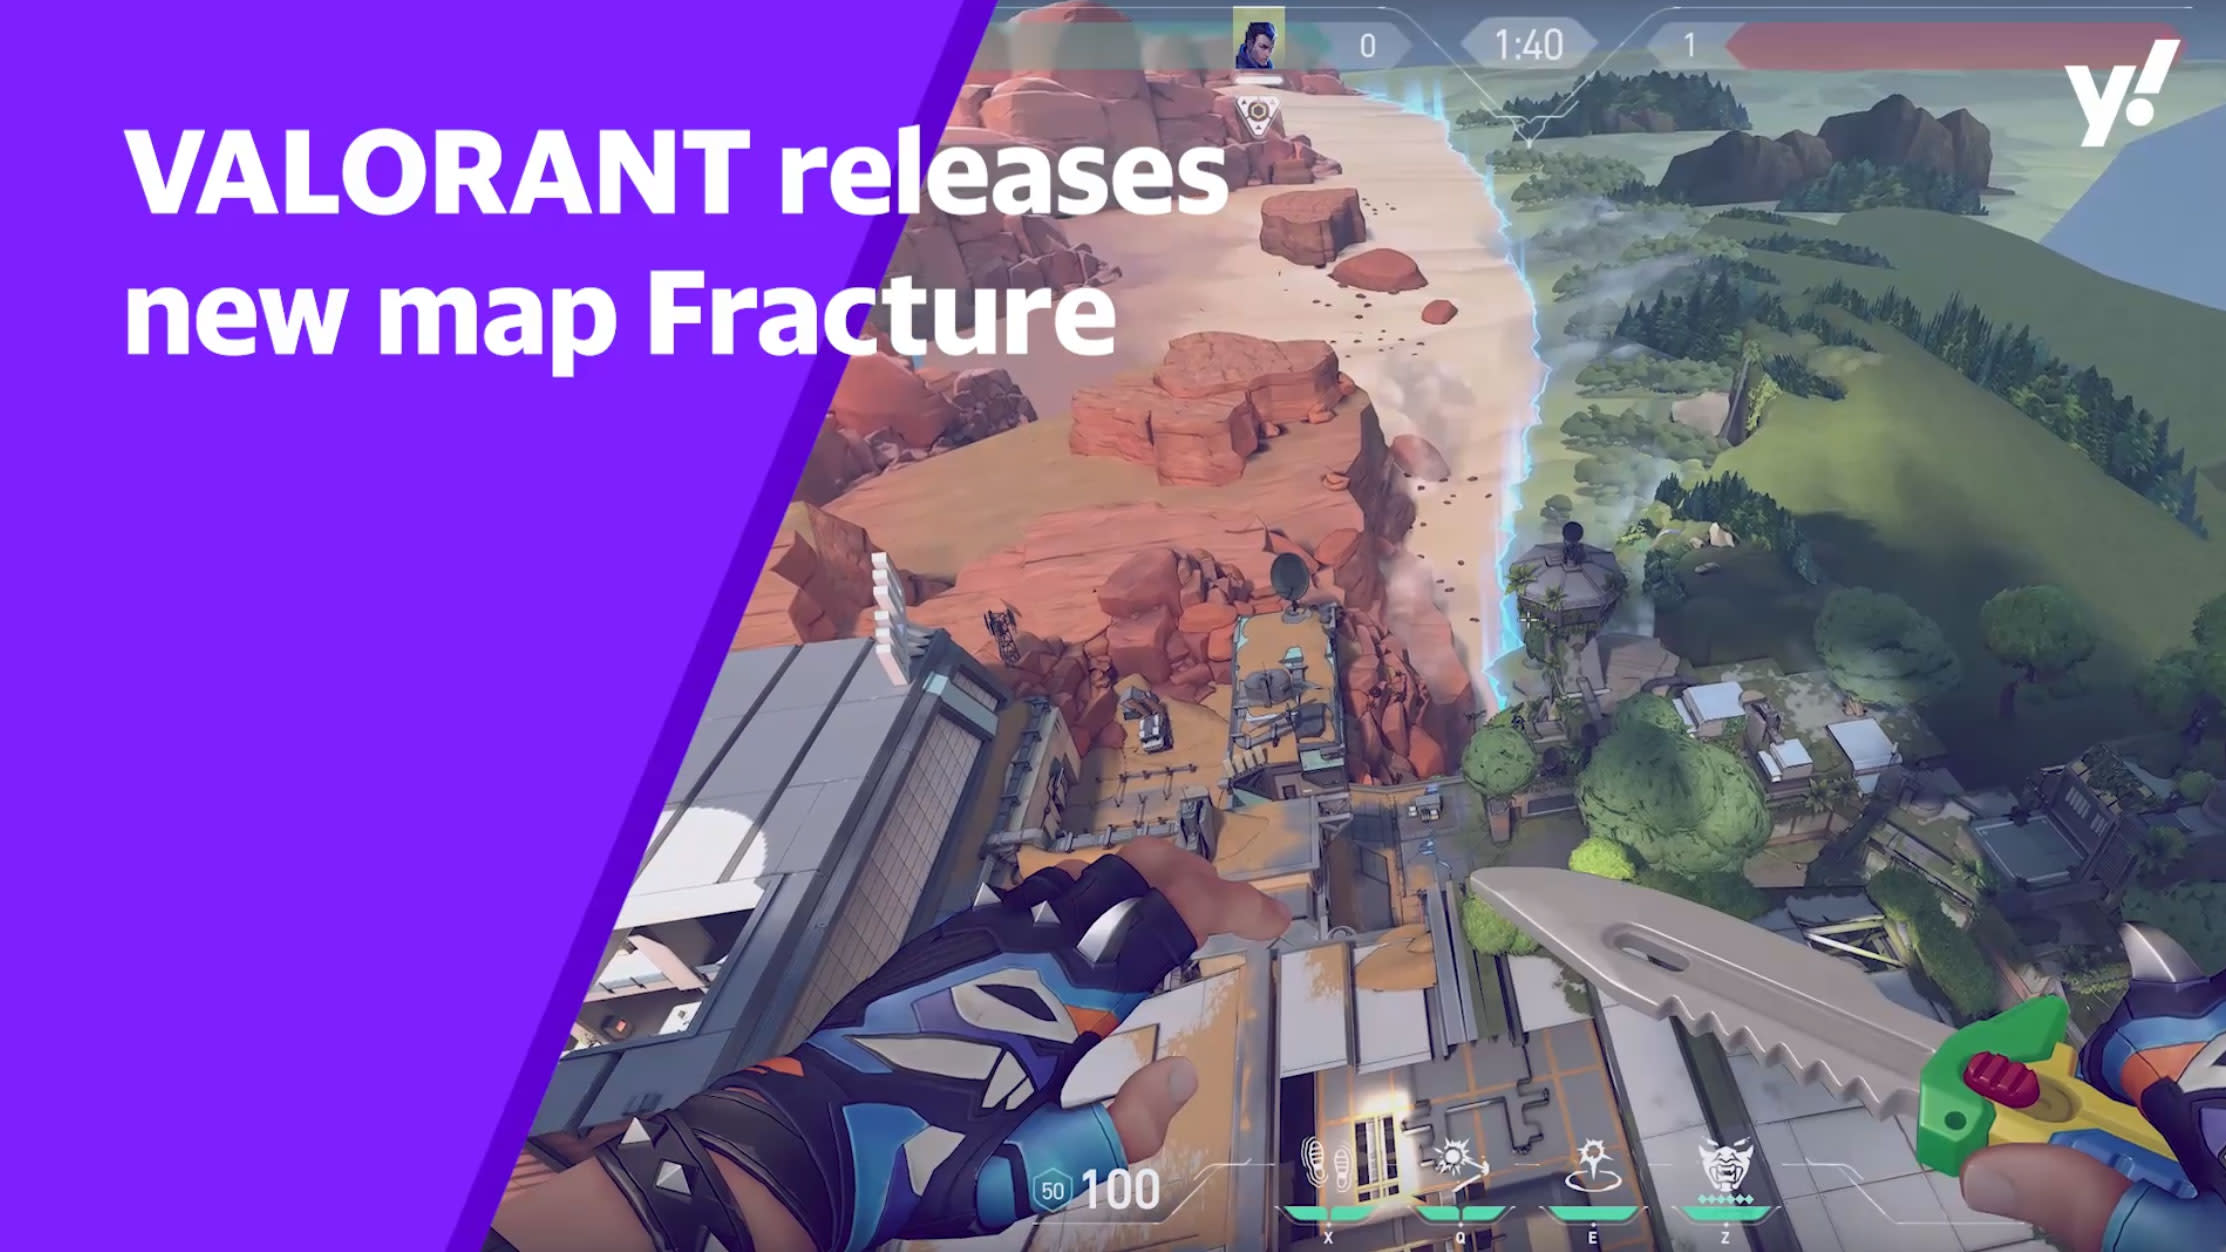 VALORANT reveals their newest map: Fracture